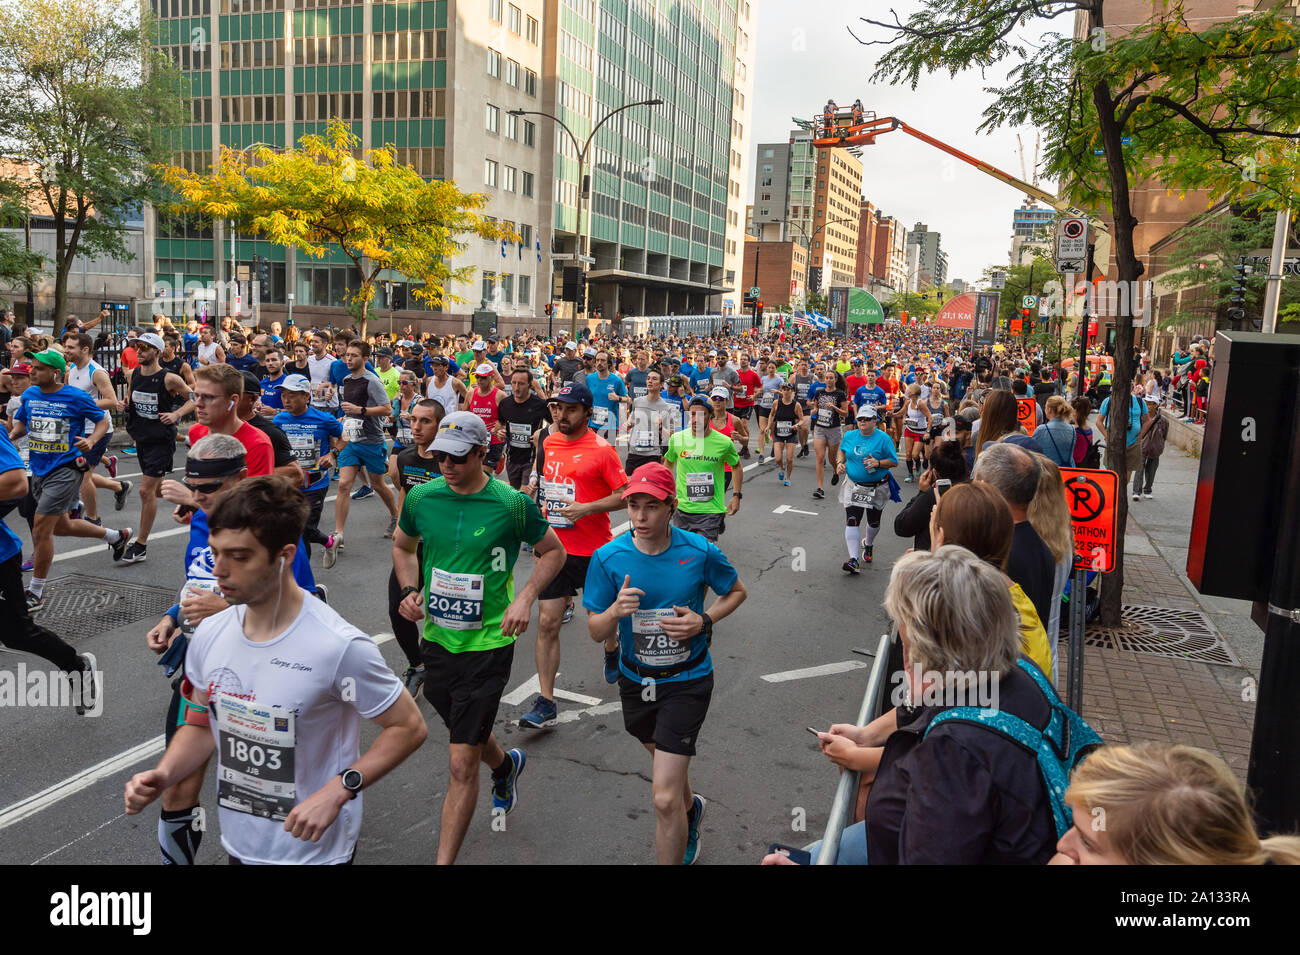 Montreal, Canada - 22 September 2019: Runners and participants at the start of the Marathon Stock Photo